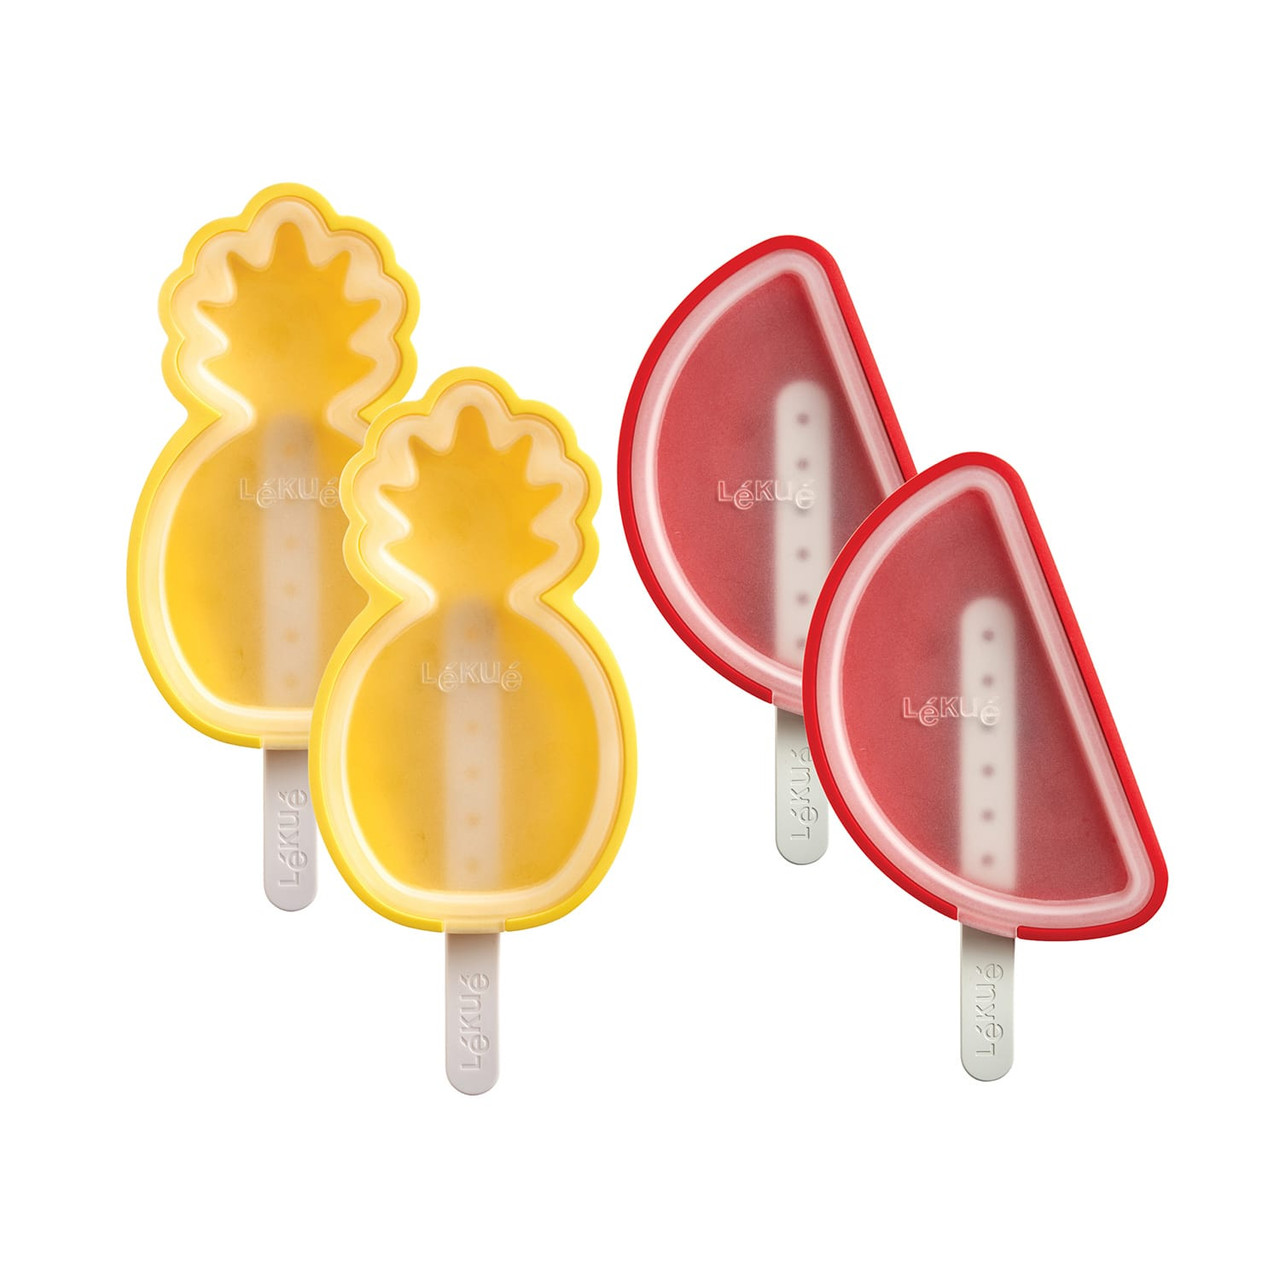 https://cdn11.bigcommerce.com/s-hccytny0od/images/stencil/1280x1280/products/3989/14593/lekue-tropical-fruit-popsicle-molds__27391.1617542869.jpg?c=2?imbypass=on